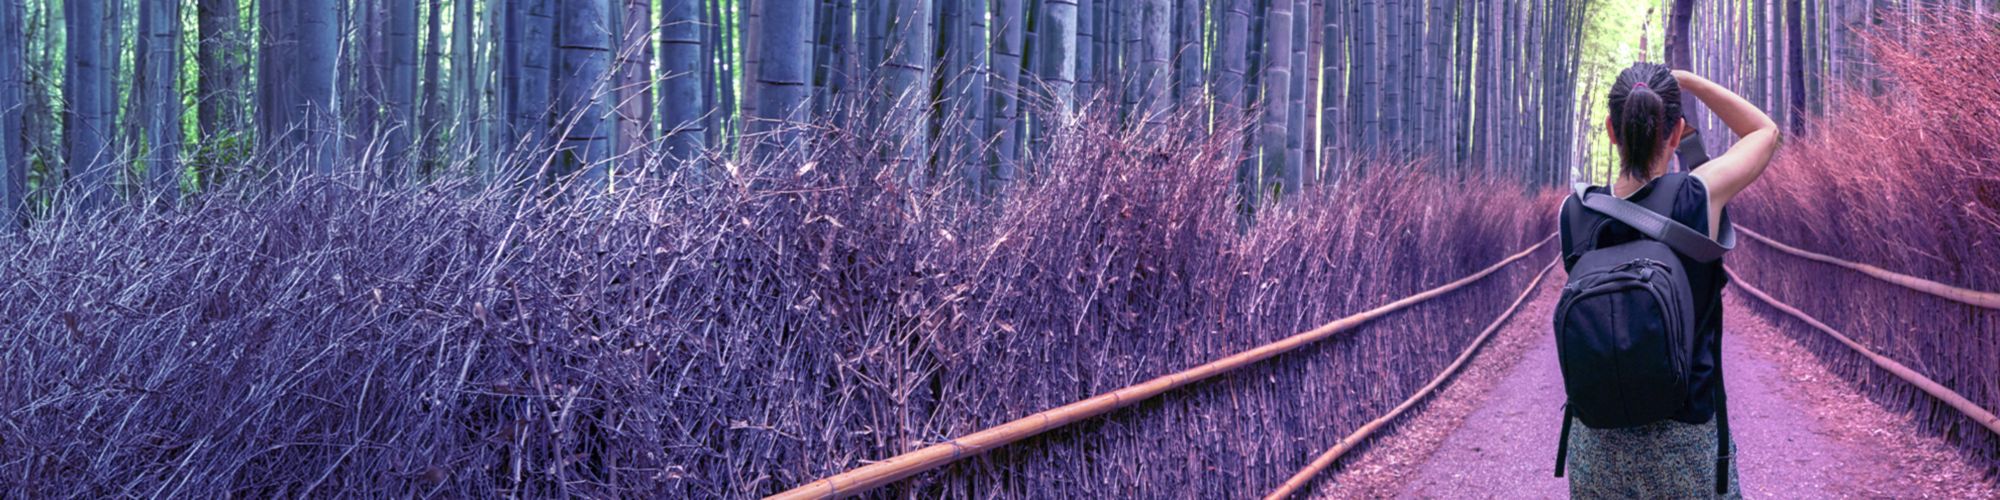 Female photographer in kyoto bamboo forest